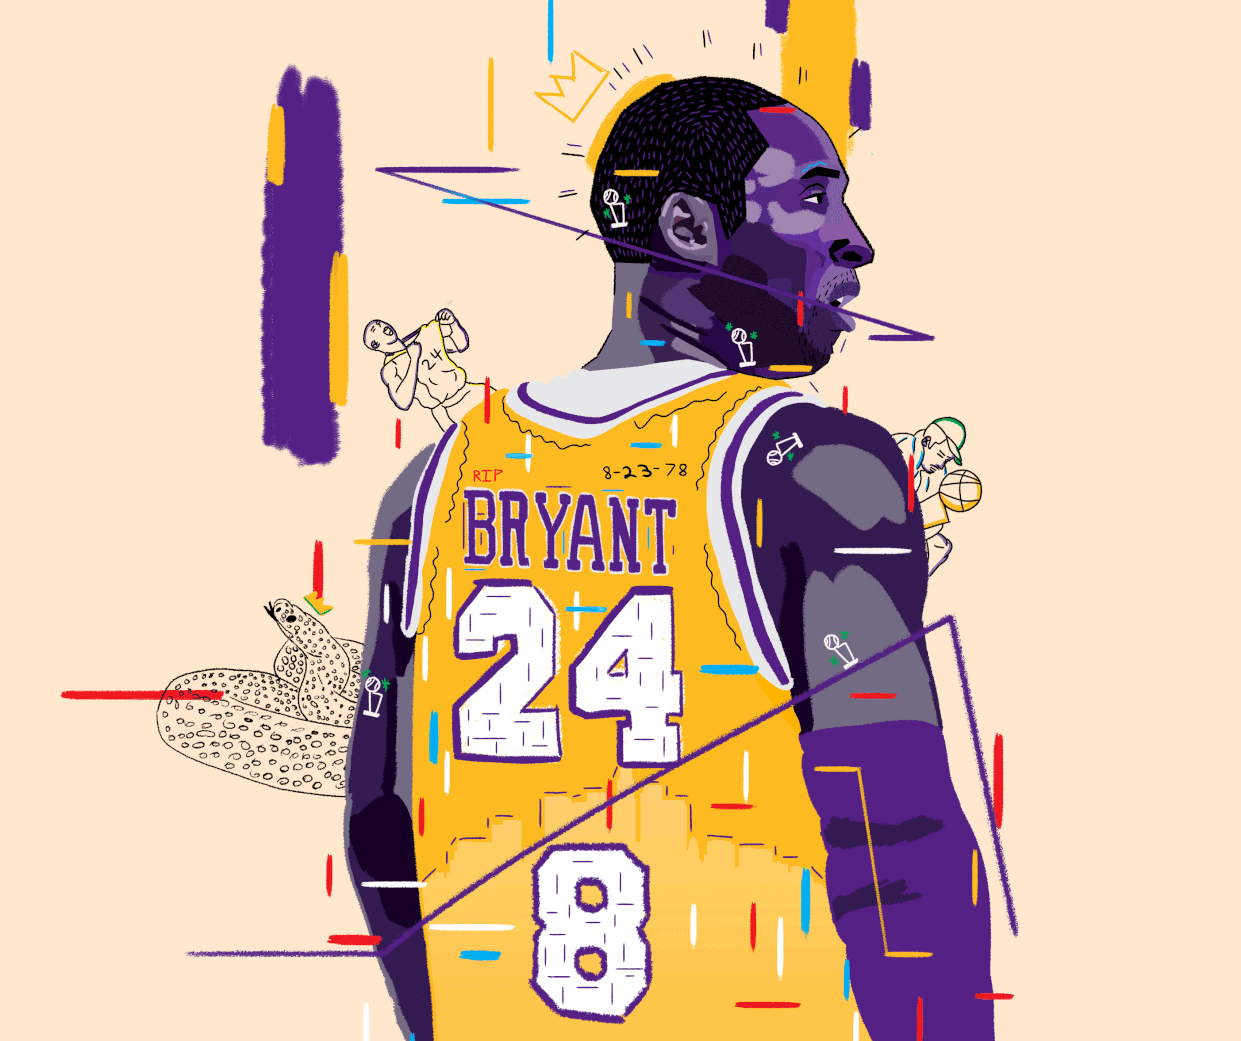 Today would have been Kobe Bryant's 42nd birthday. He gave Los Angeles memories and a mamba legacy.